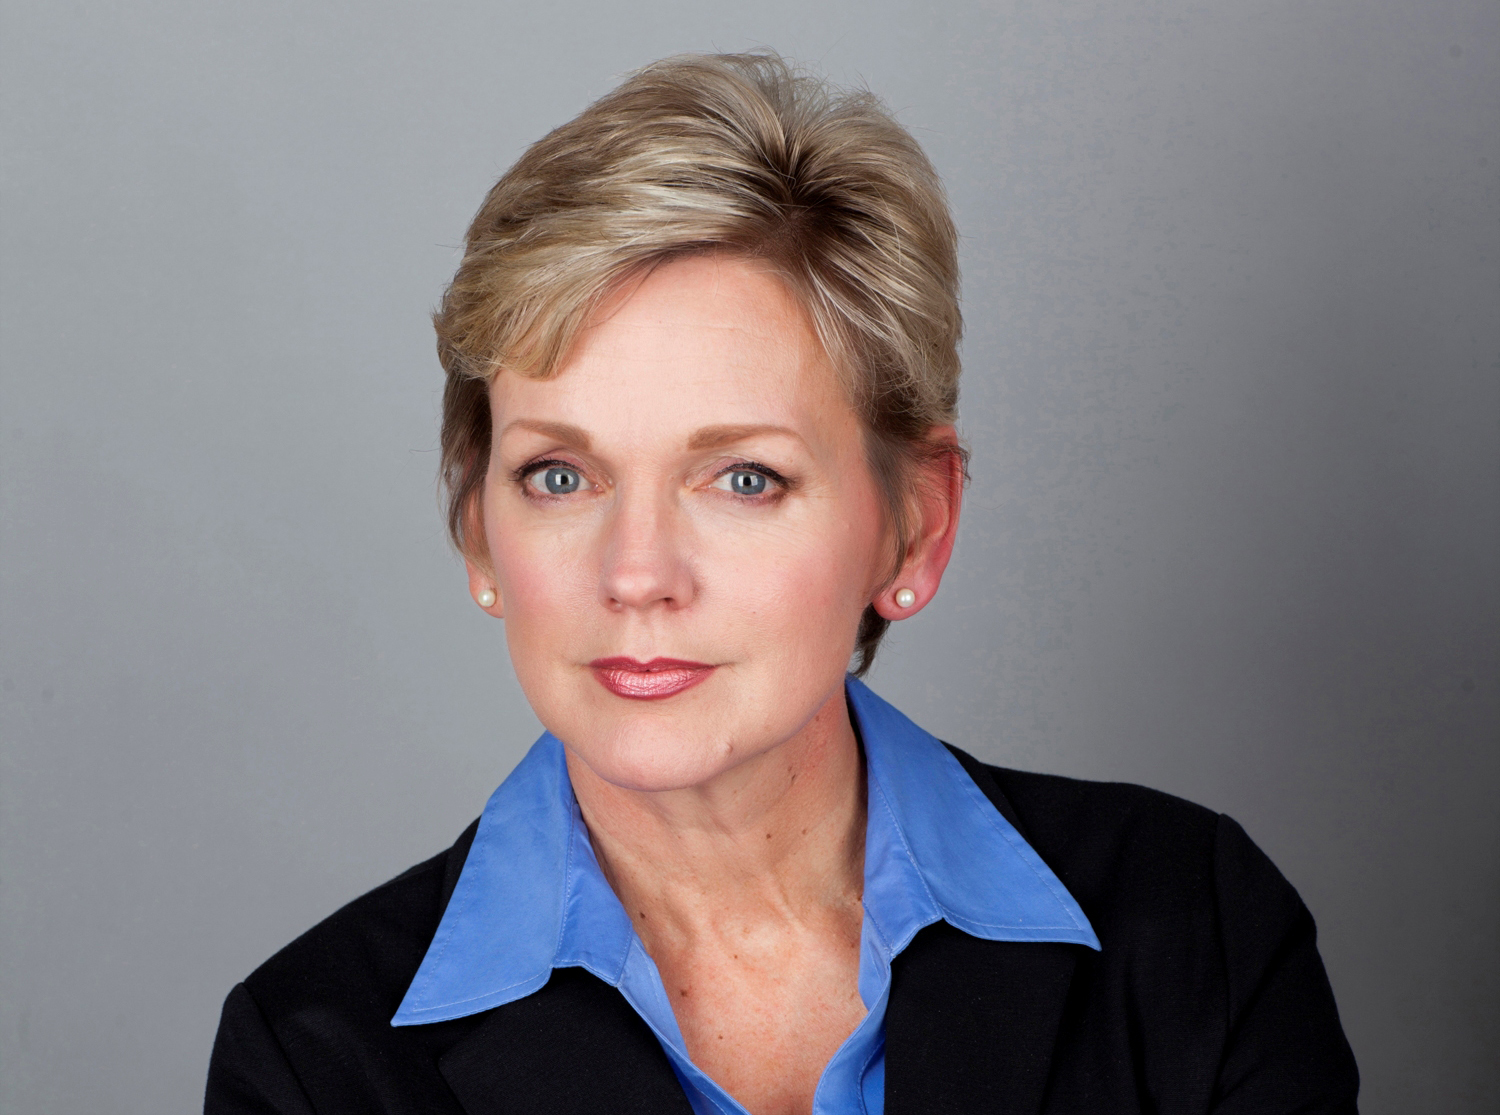 governor-granholm-called-to-underfund-pensions-6-years-before-company